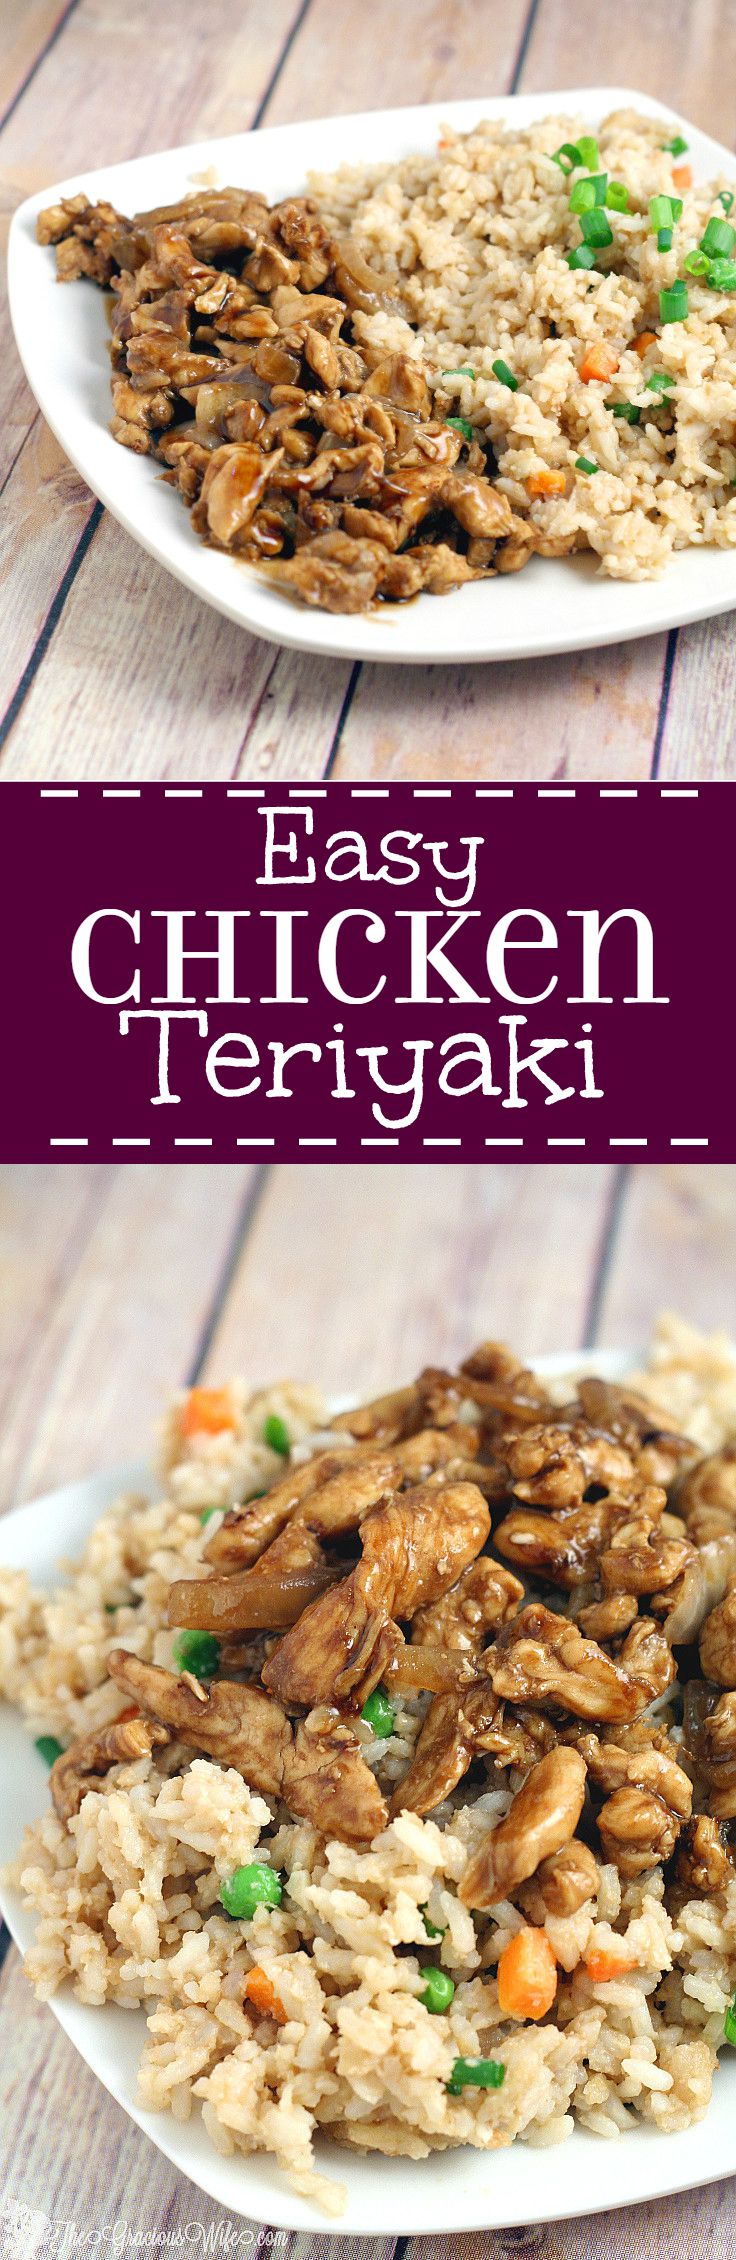 Easy Chicken Teriyaki Recipe is a quick and easy dinner idea that the whole family will love. My kids gobble this up!